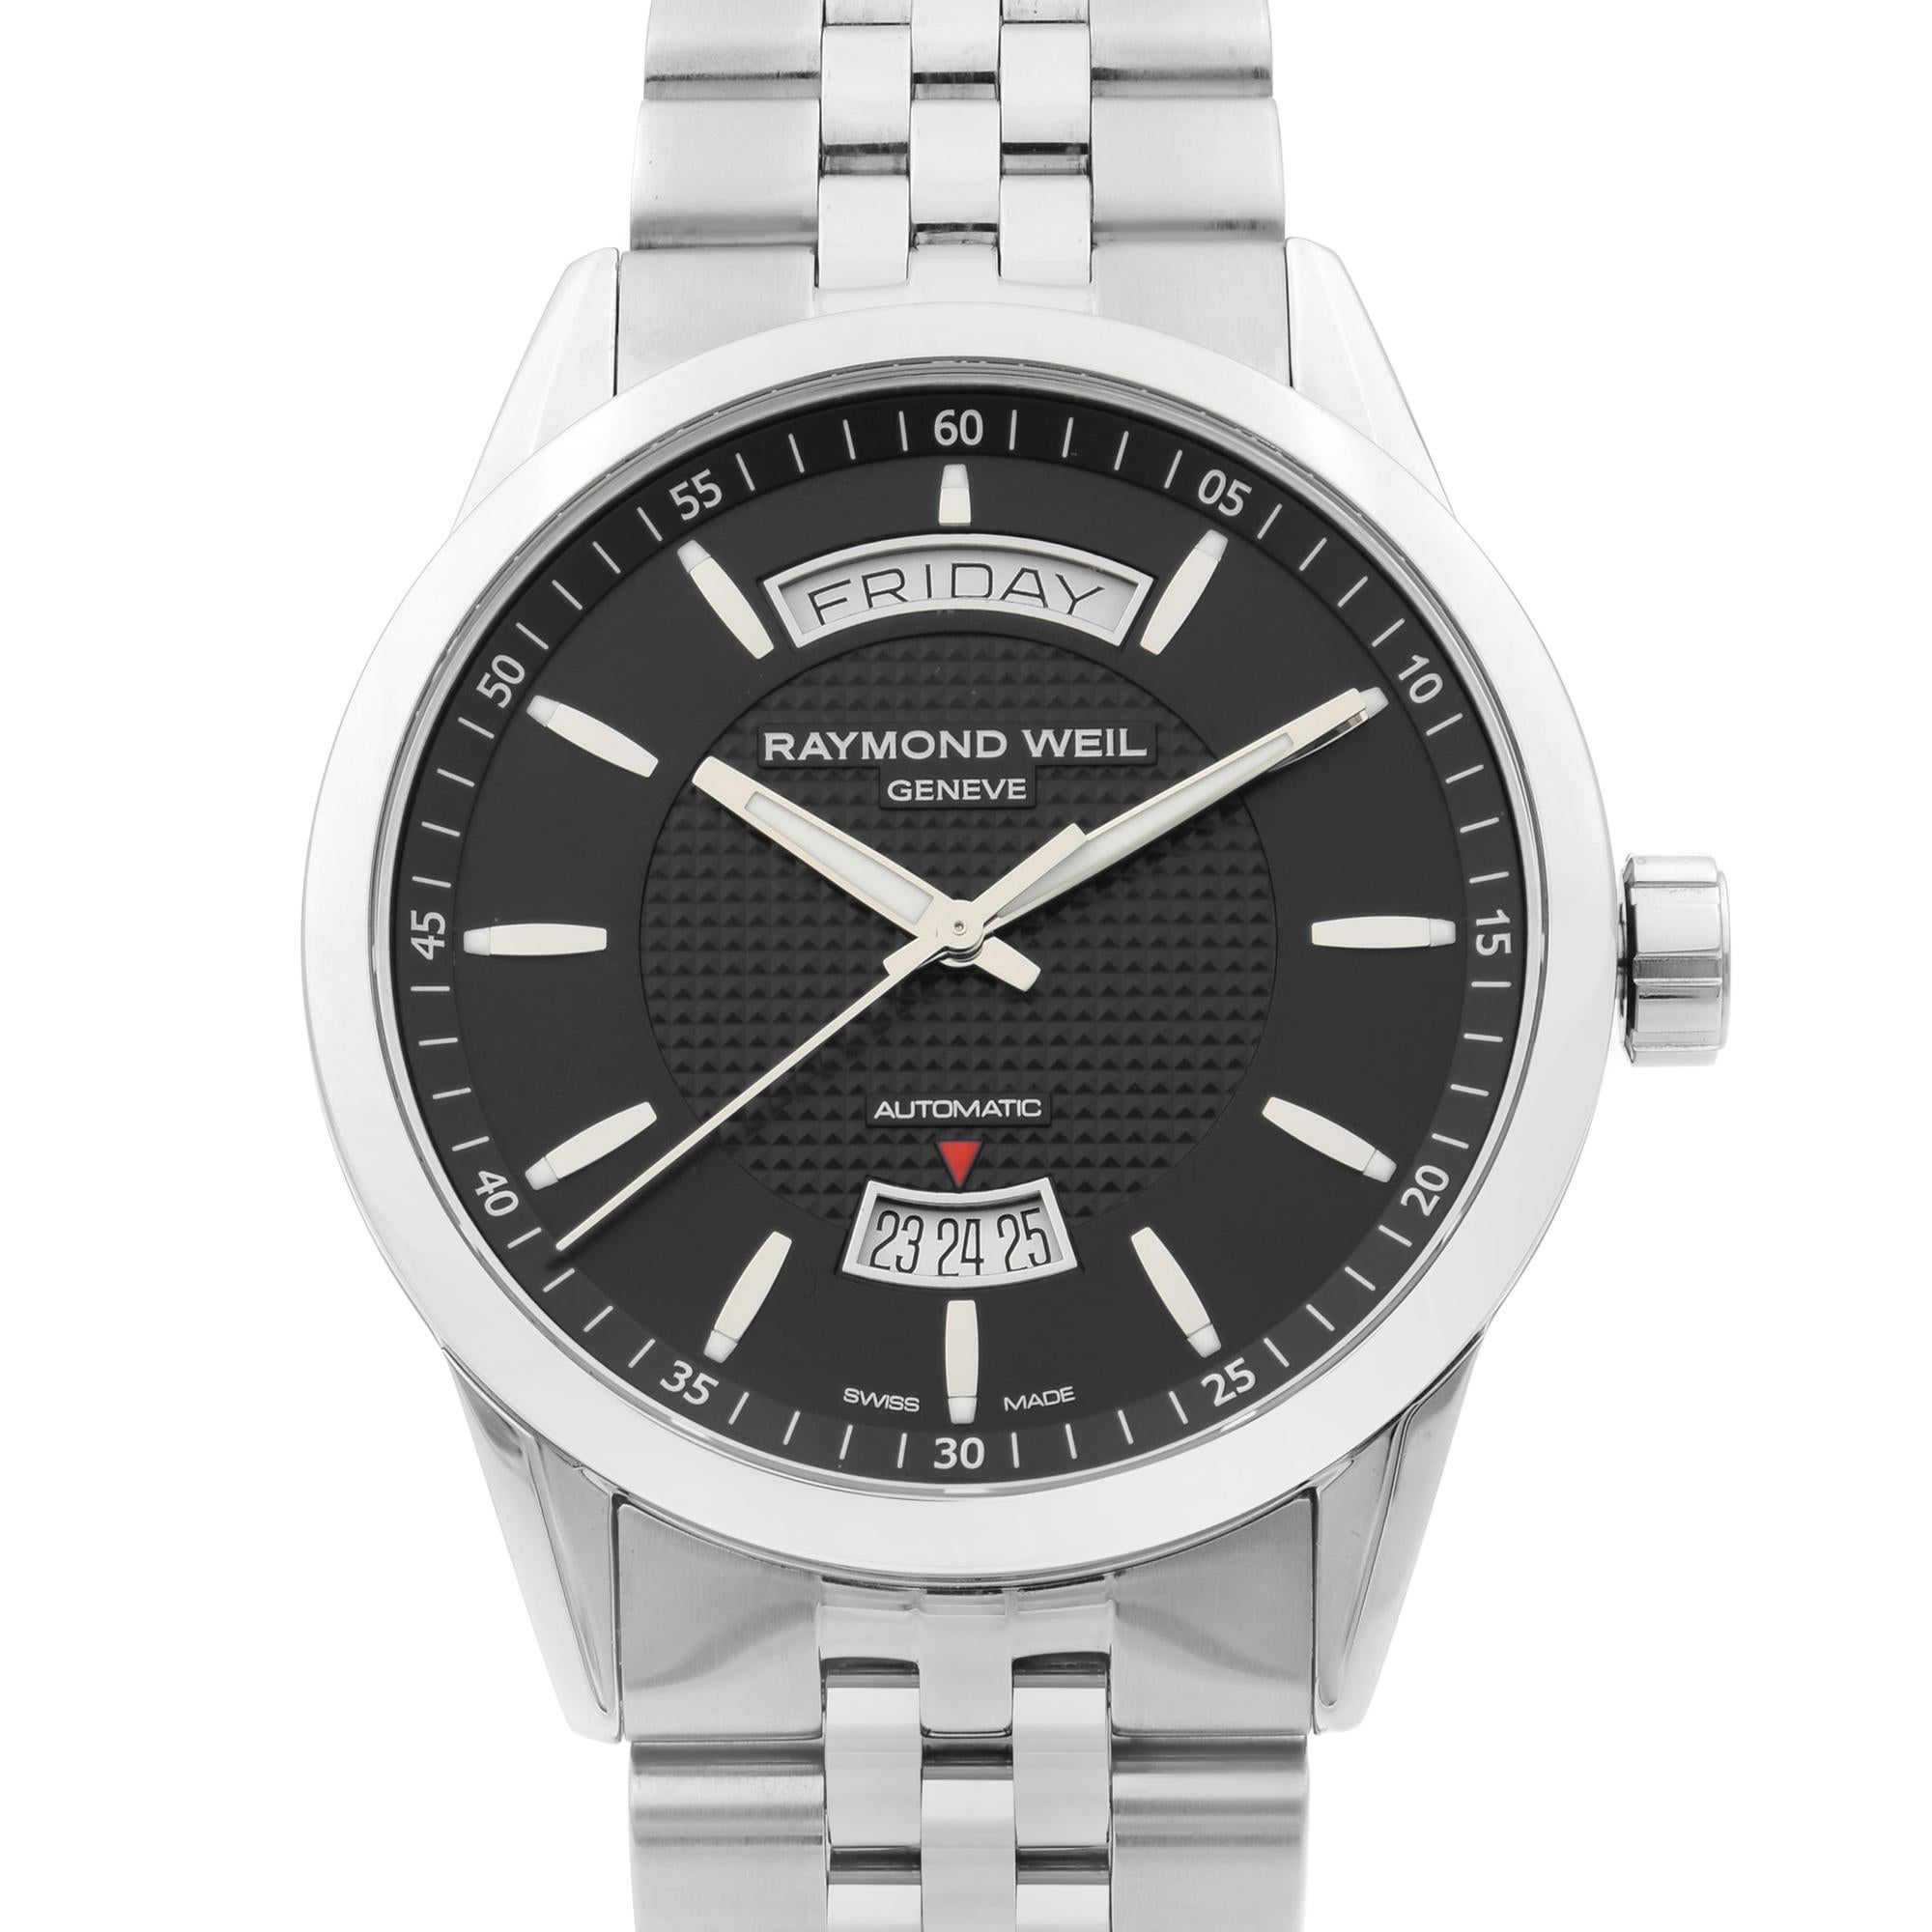 New Without Tags Raymond Weil Freelancer Steel Black Dial Automatic Men's Watch 2720-ST-20021. This Beautiful Timepiece Features: Stainless Steel Case and Bracelet, Fixed Stainless Steel Bezel, Black Dial with Luminous Silver-Tone Hands, And Index